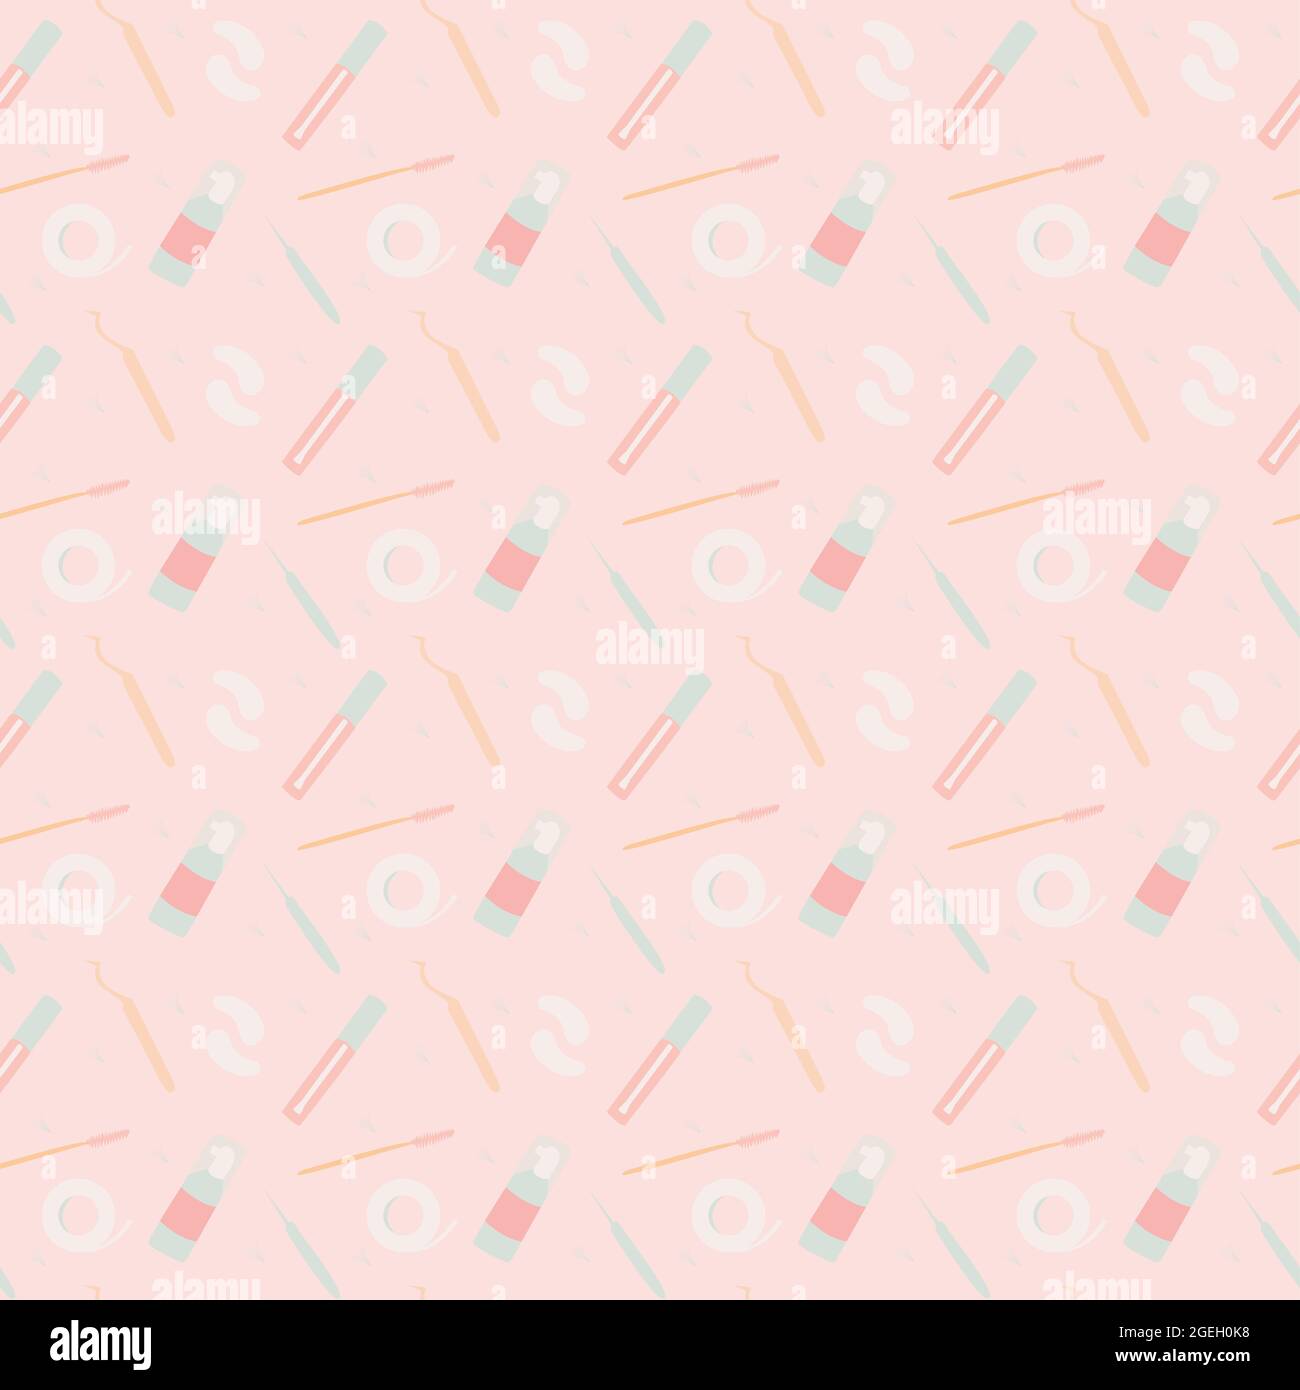 Seamless pattern tools for eyelash extensions. Vector illustration. Stock Photo